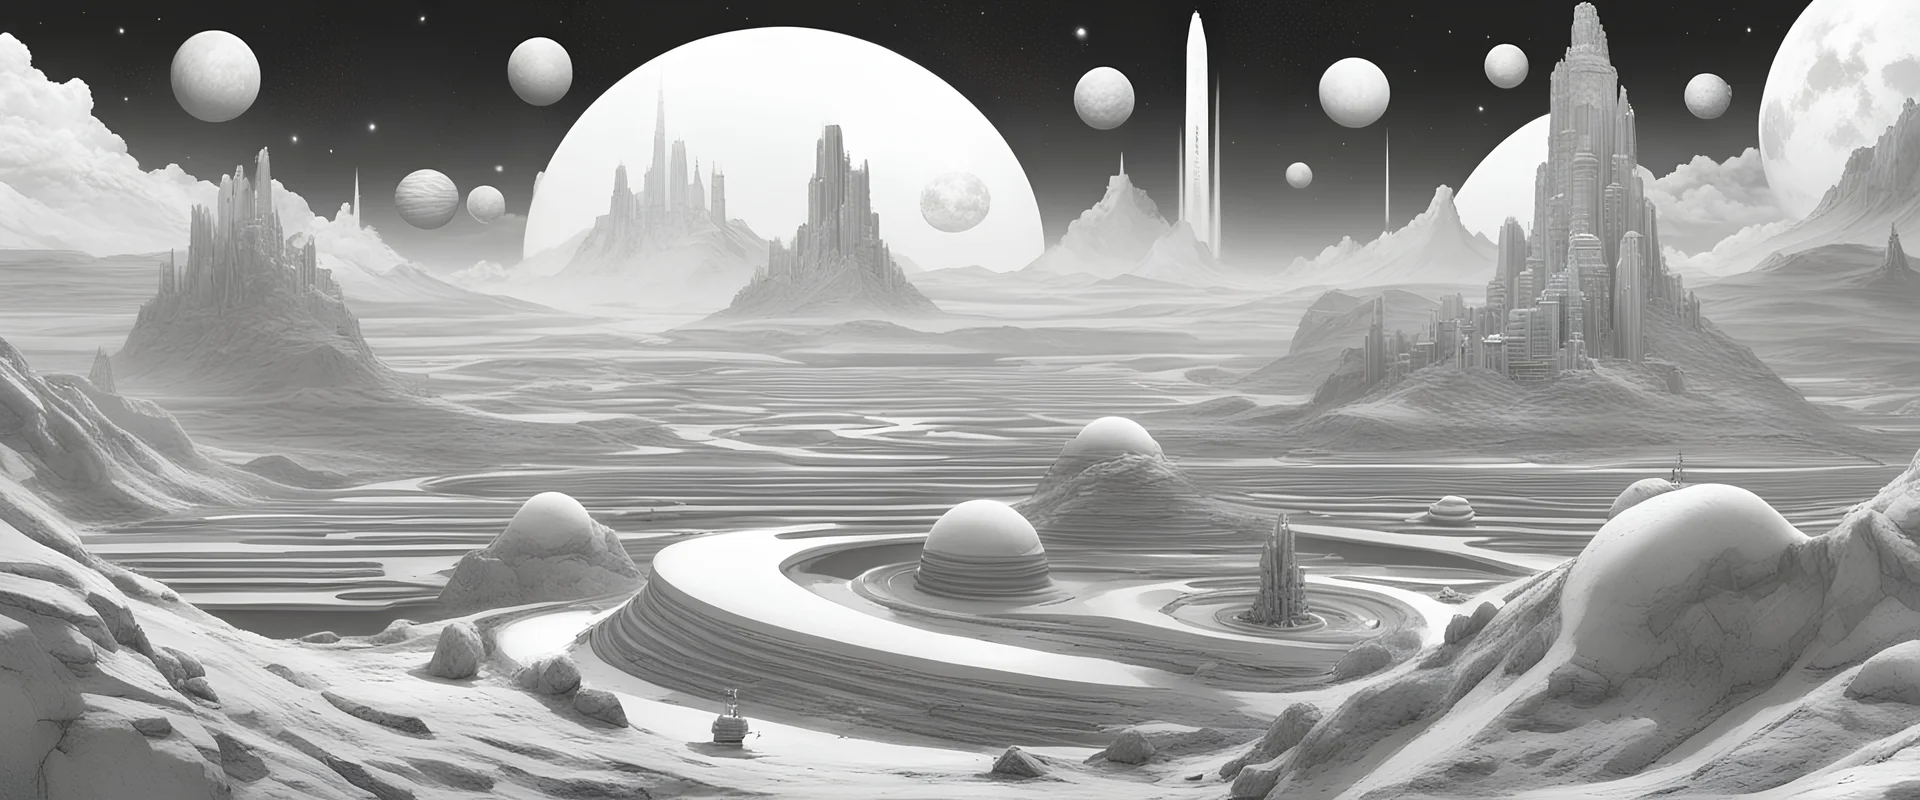 Ethnic and science fiction in a cosmic landscape , black e white